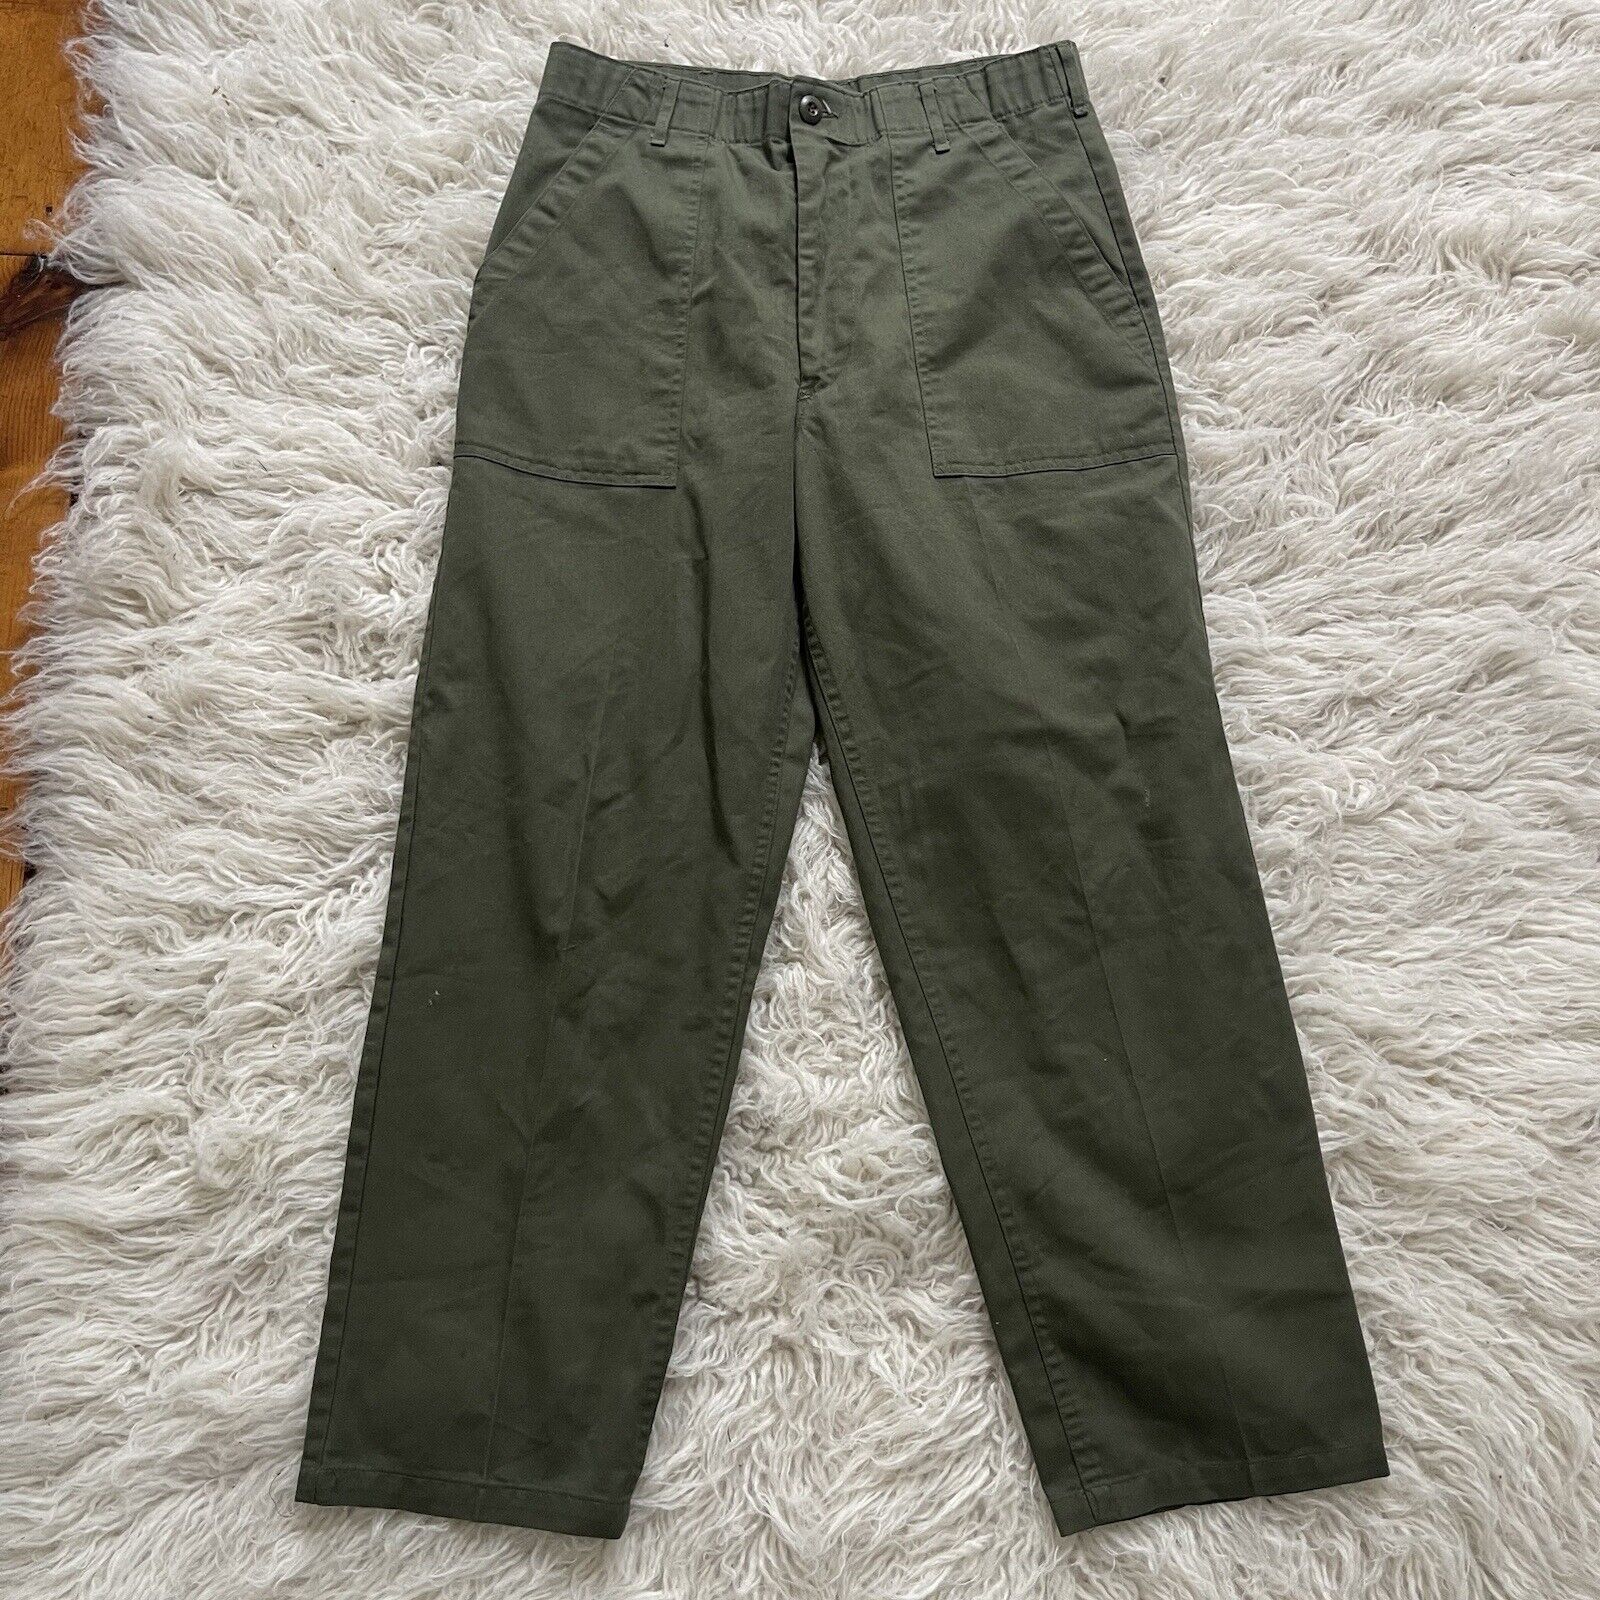 Vintage 70's OG-507 Pants Mens 32x27 Green Military Vietnam Fatigue Ideal Army